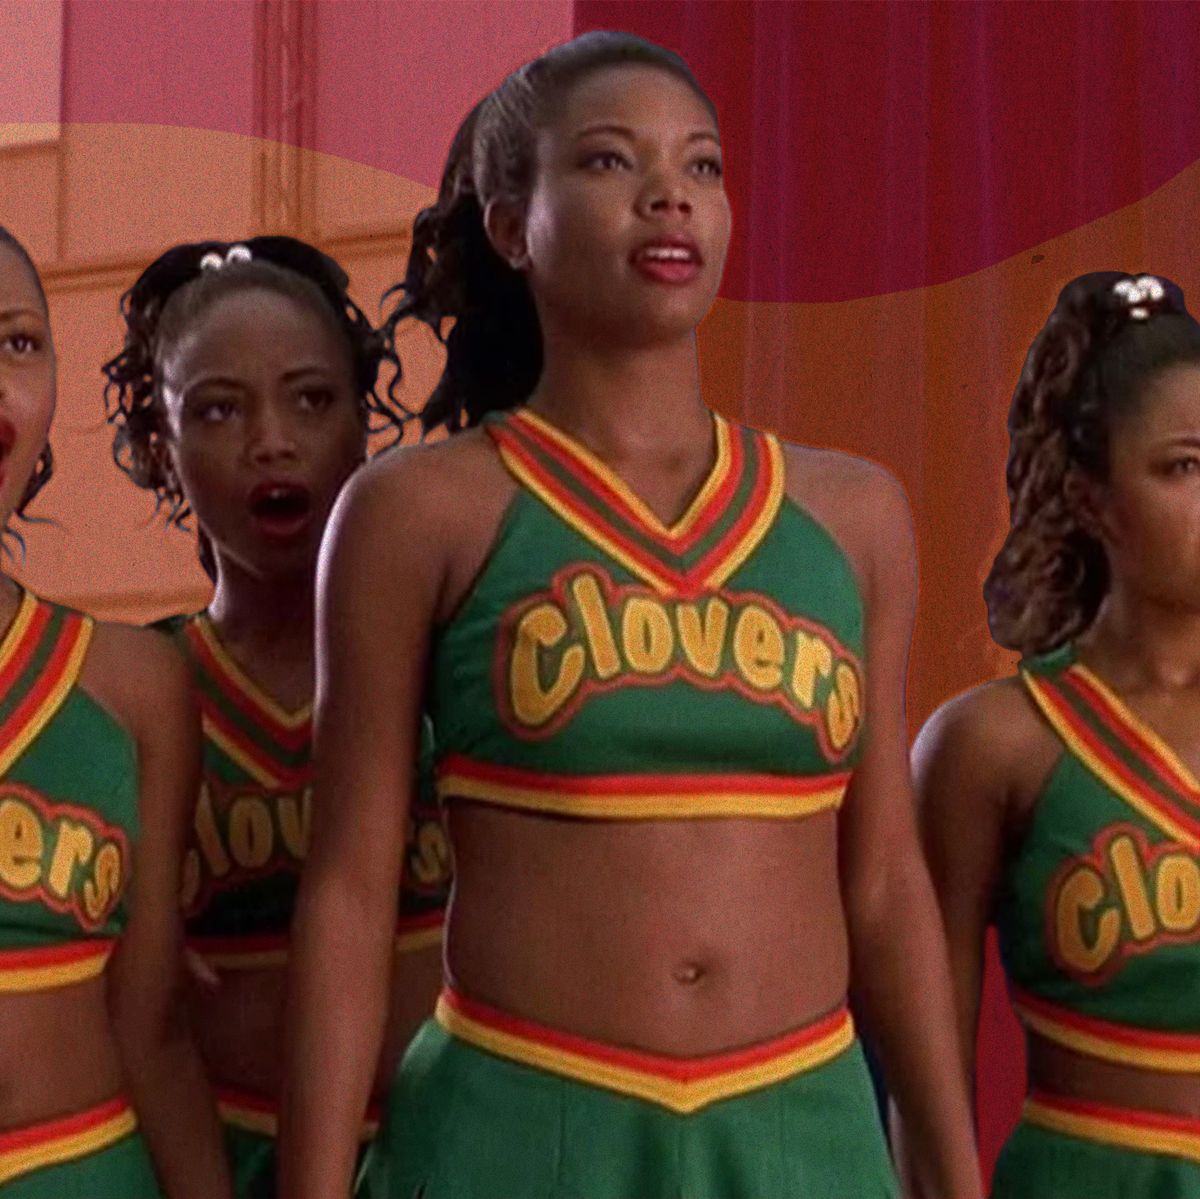 Bring It On: The Complete Story of the Cheerleading Movie That Changed,  Like, Everything by Kase Wickman